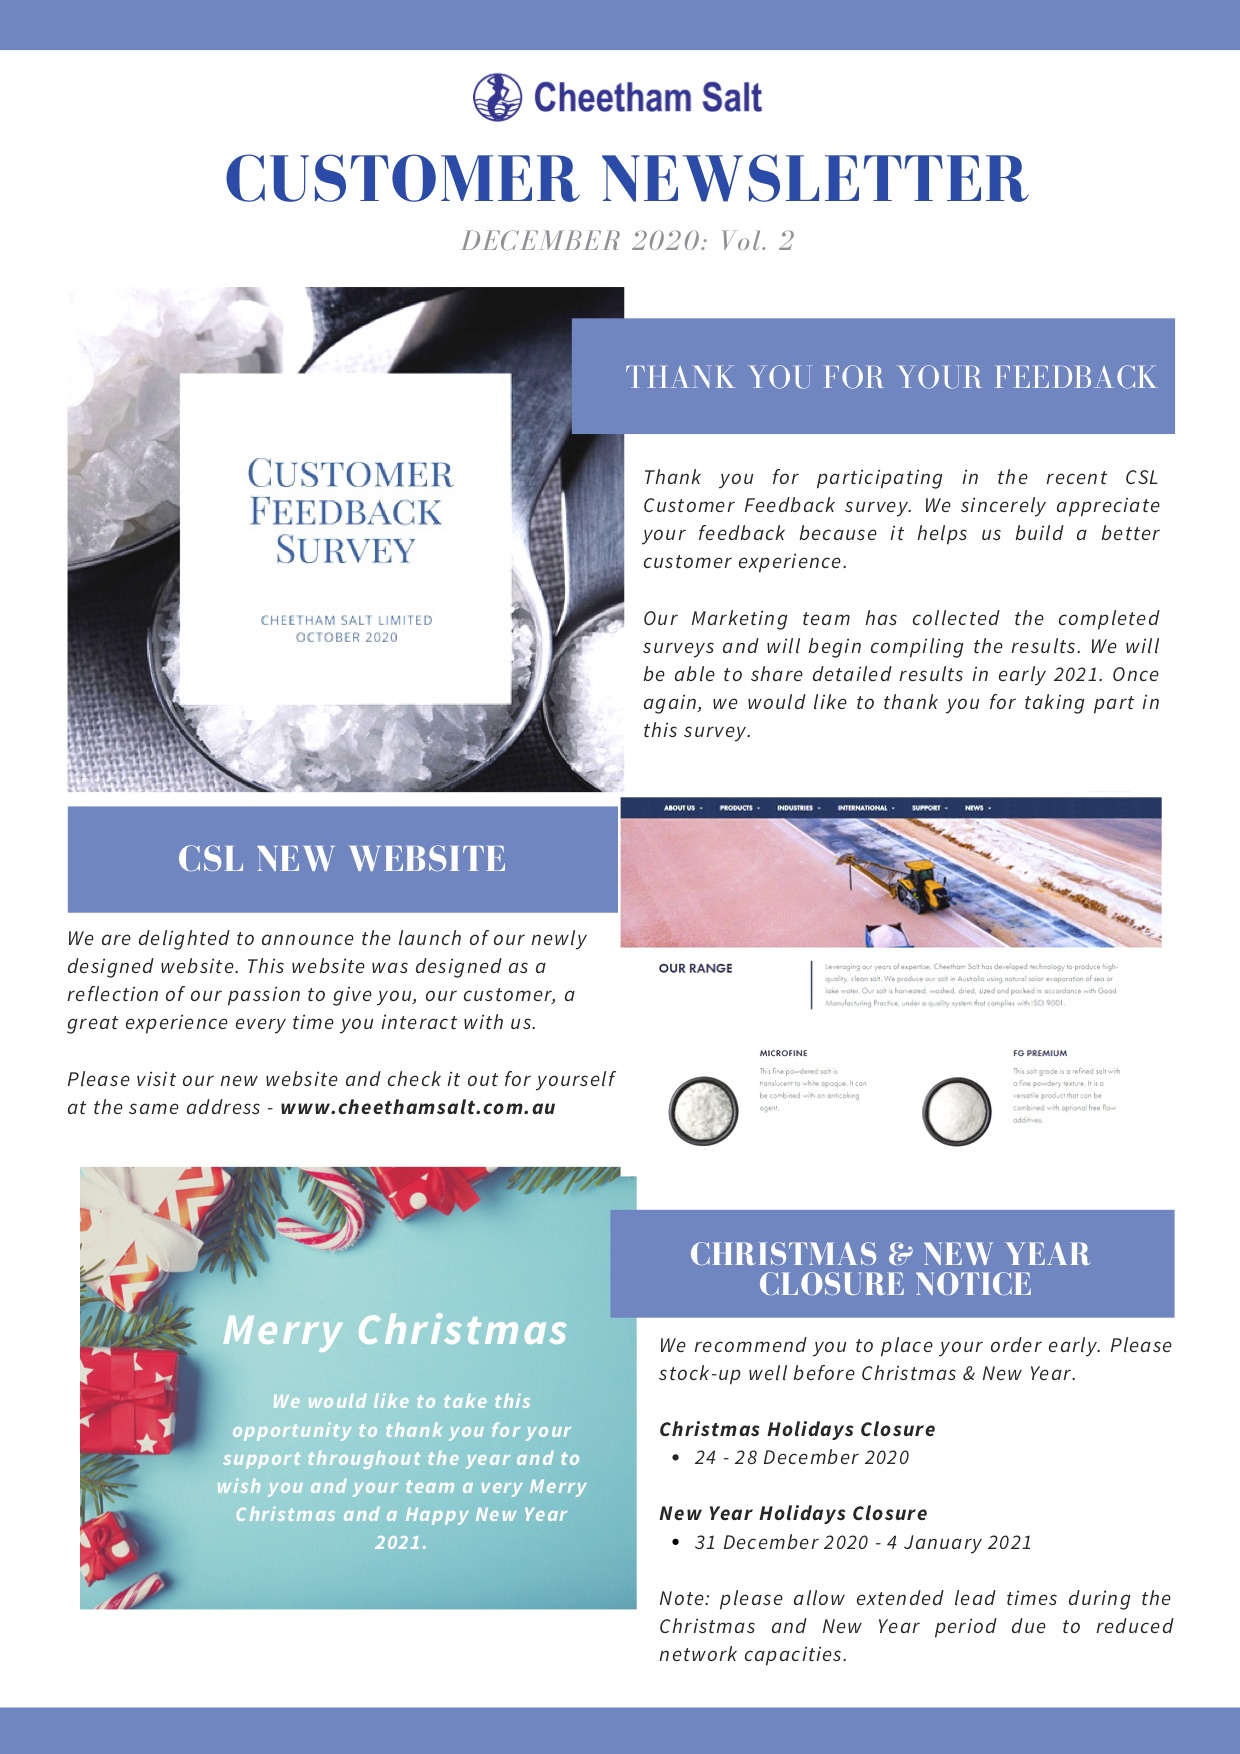 The front cover of the December 2020 Cheetham Salt Customer Newsletter. The cover includes information about the customer feedback survey.